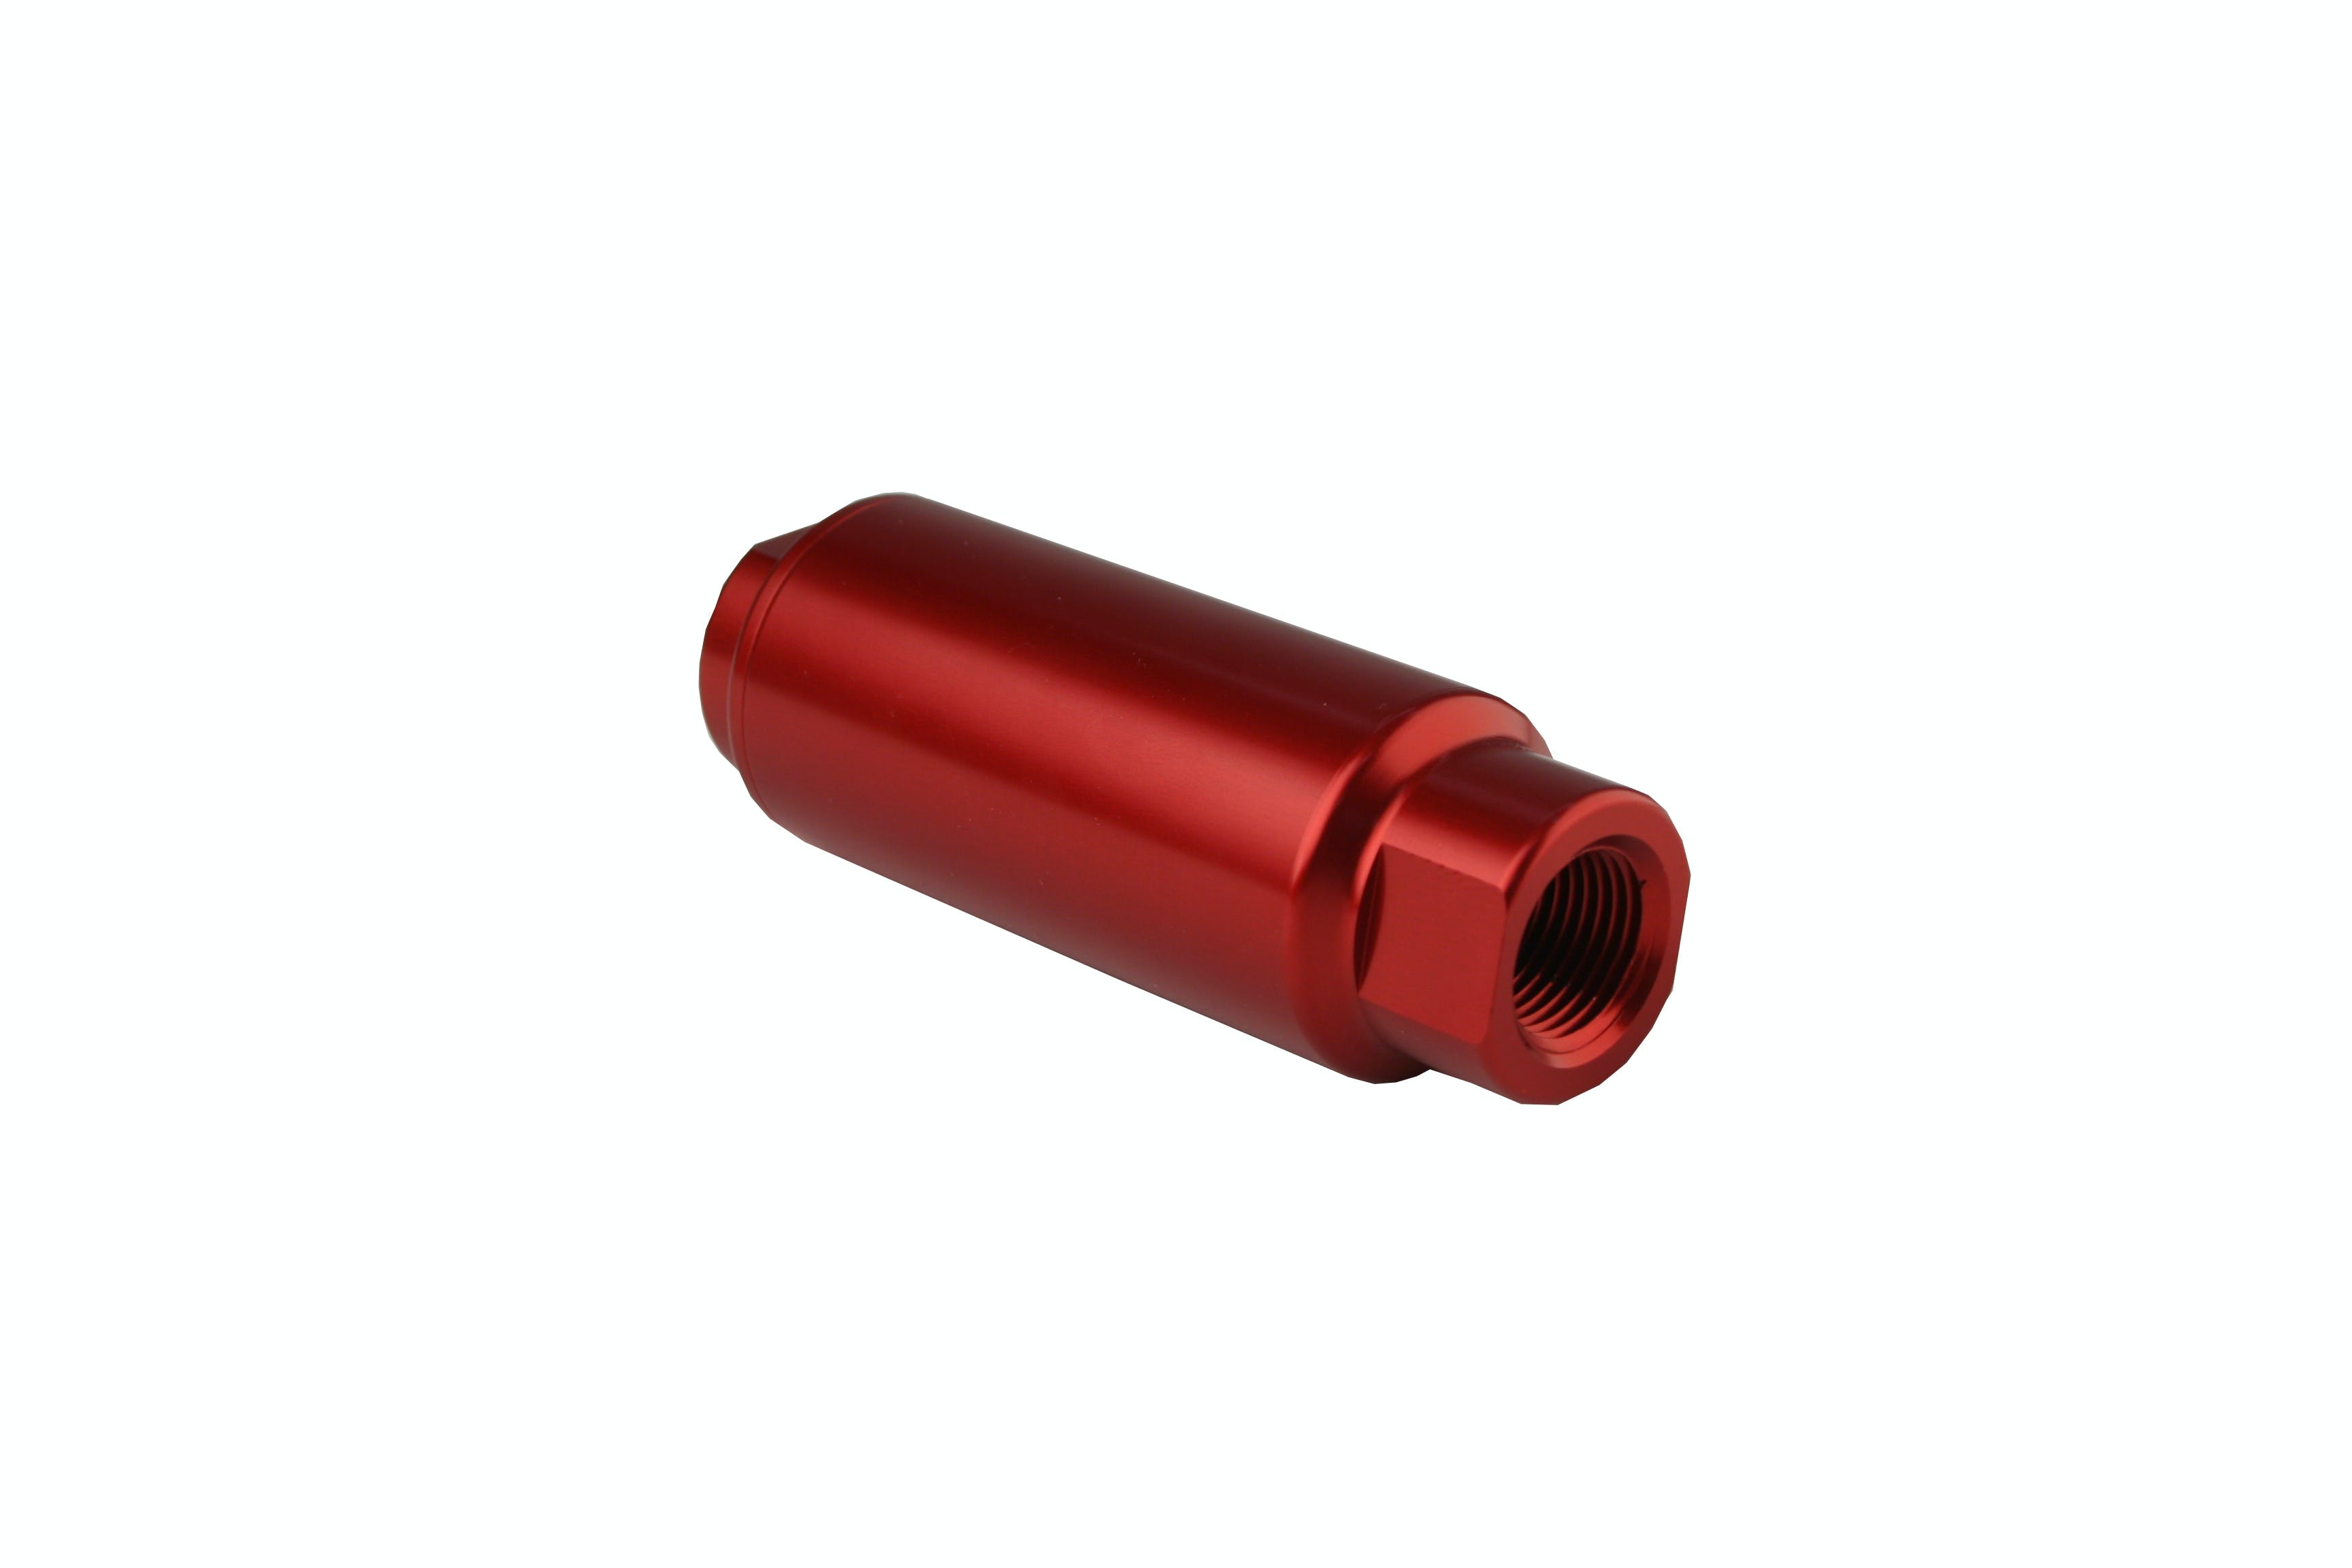 Aeromotive Fuel System 12316 Filter, In-Line (3/8 NPT) 100 micron Stainless Steel element